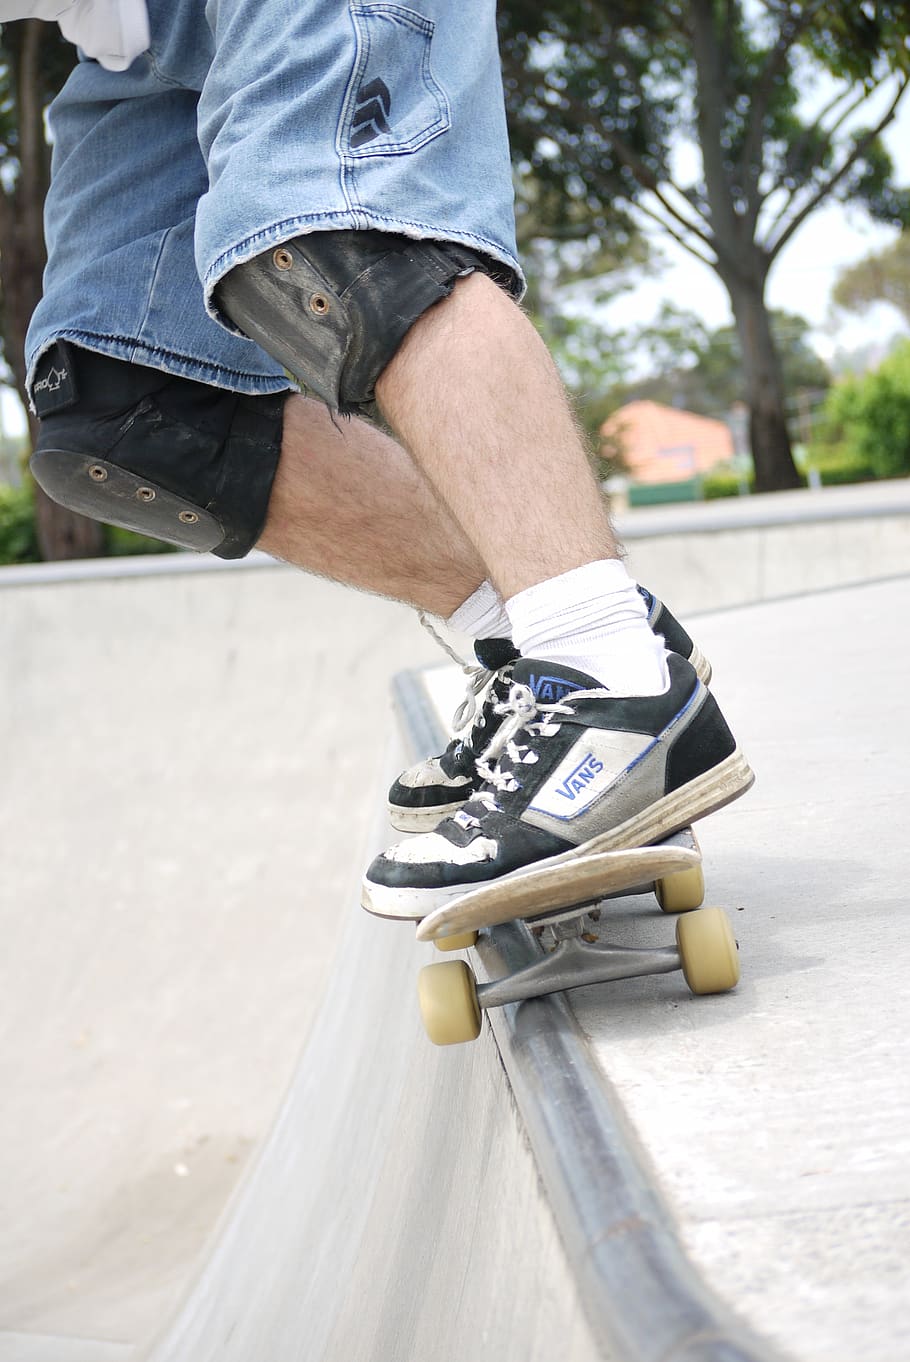 skateboard, skate, board, skateboarder, extreme, sport, active, young, activity, outdoor